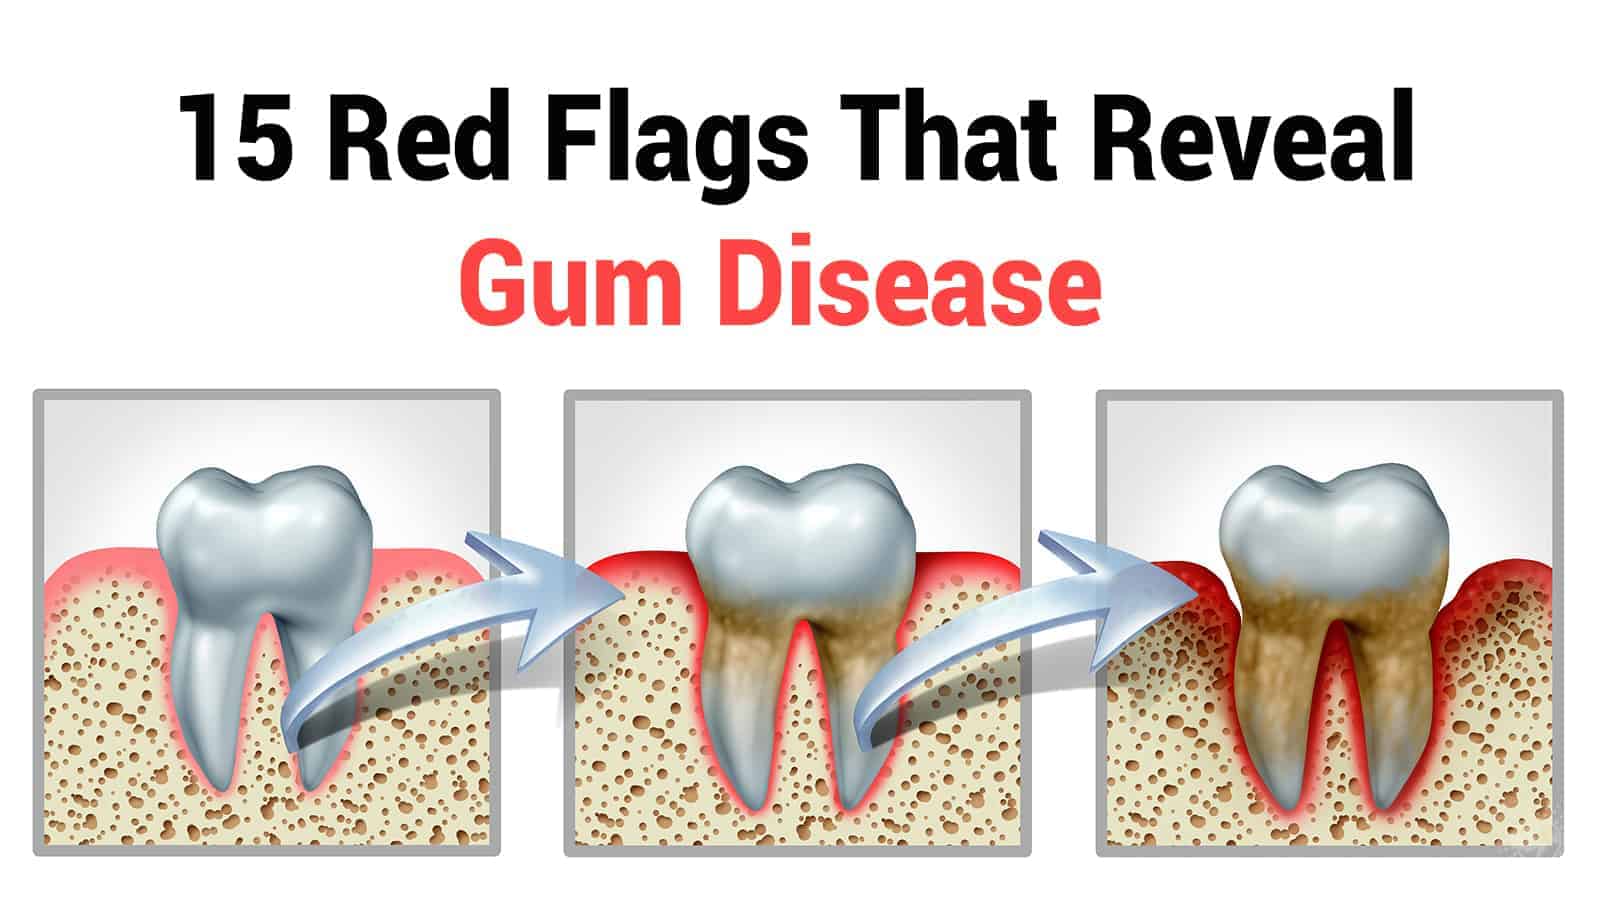 15 Red Flags That Reveal Gum Disease